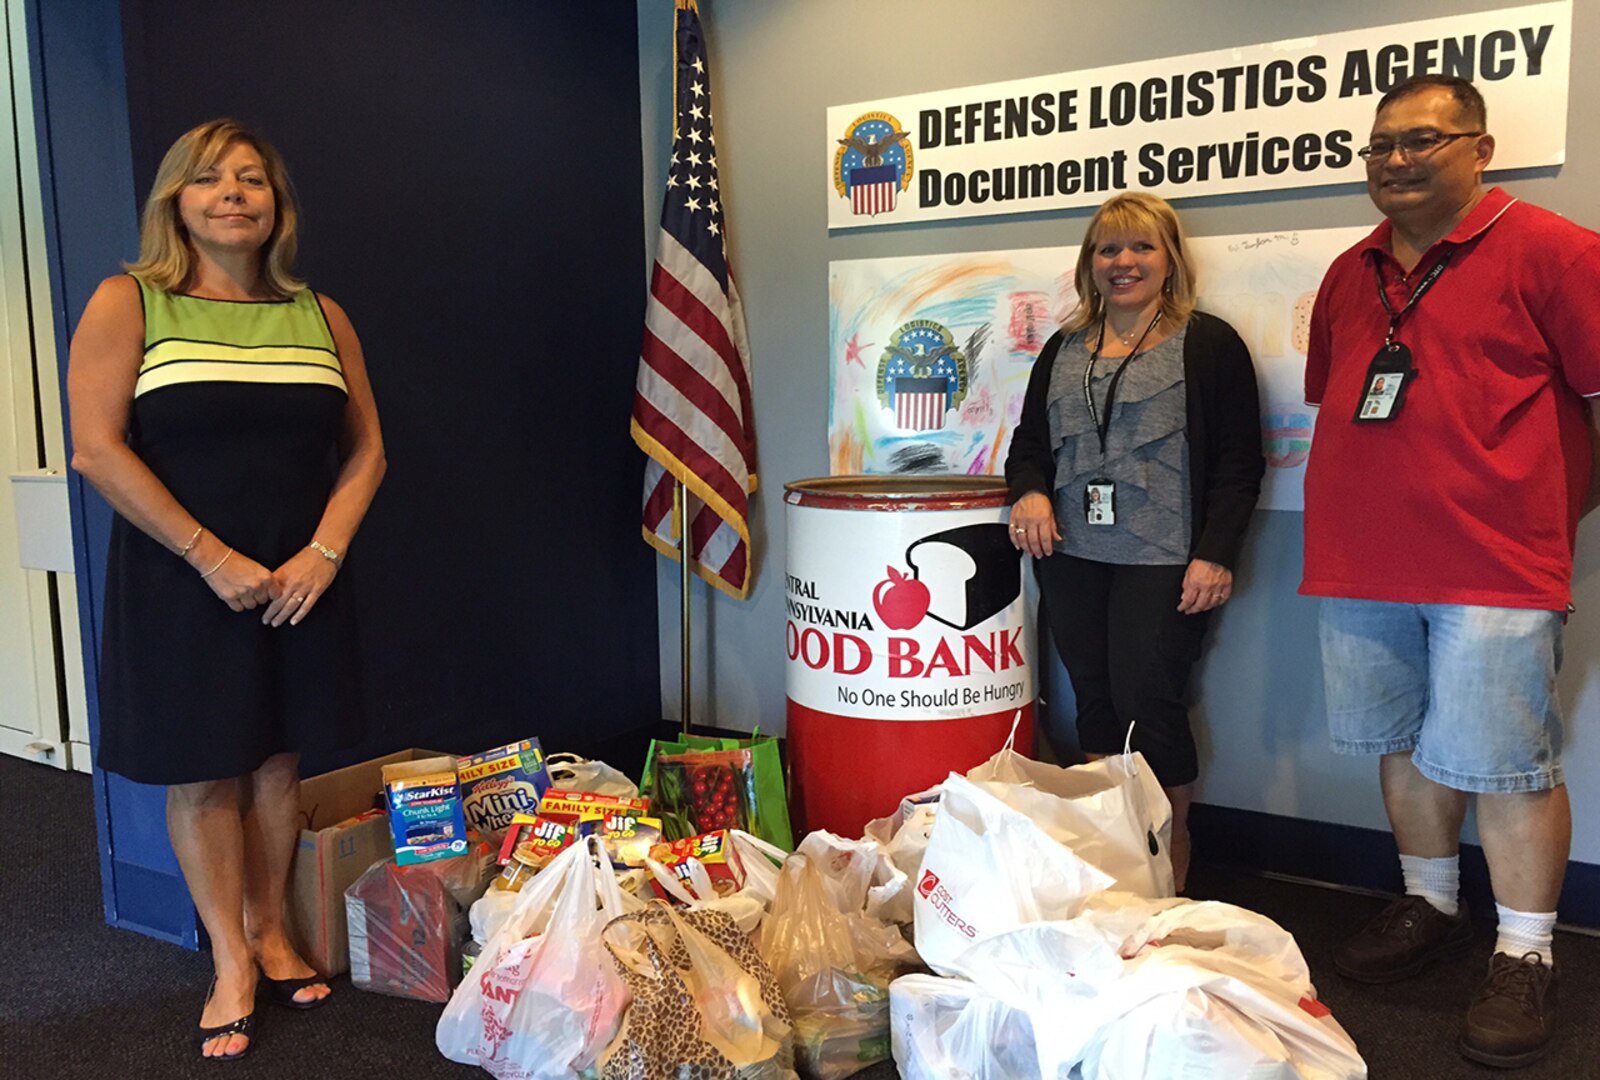 Three individual DLA offices recently combined their efforts for the recently concluded Feds Feed Families campaign. (From left) Chris Shardt, DLA Document Services; Michele Hippensteel, DLA Maritime Mechanicsburg; and Severino (Allan) Coronacion, DLA Disposition.